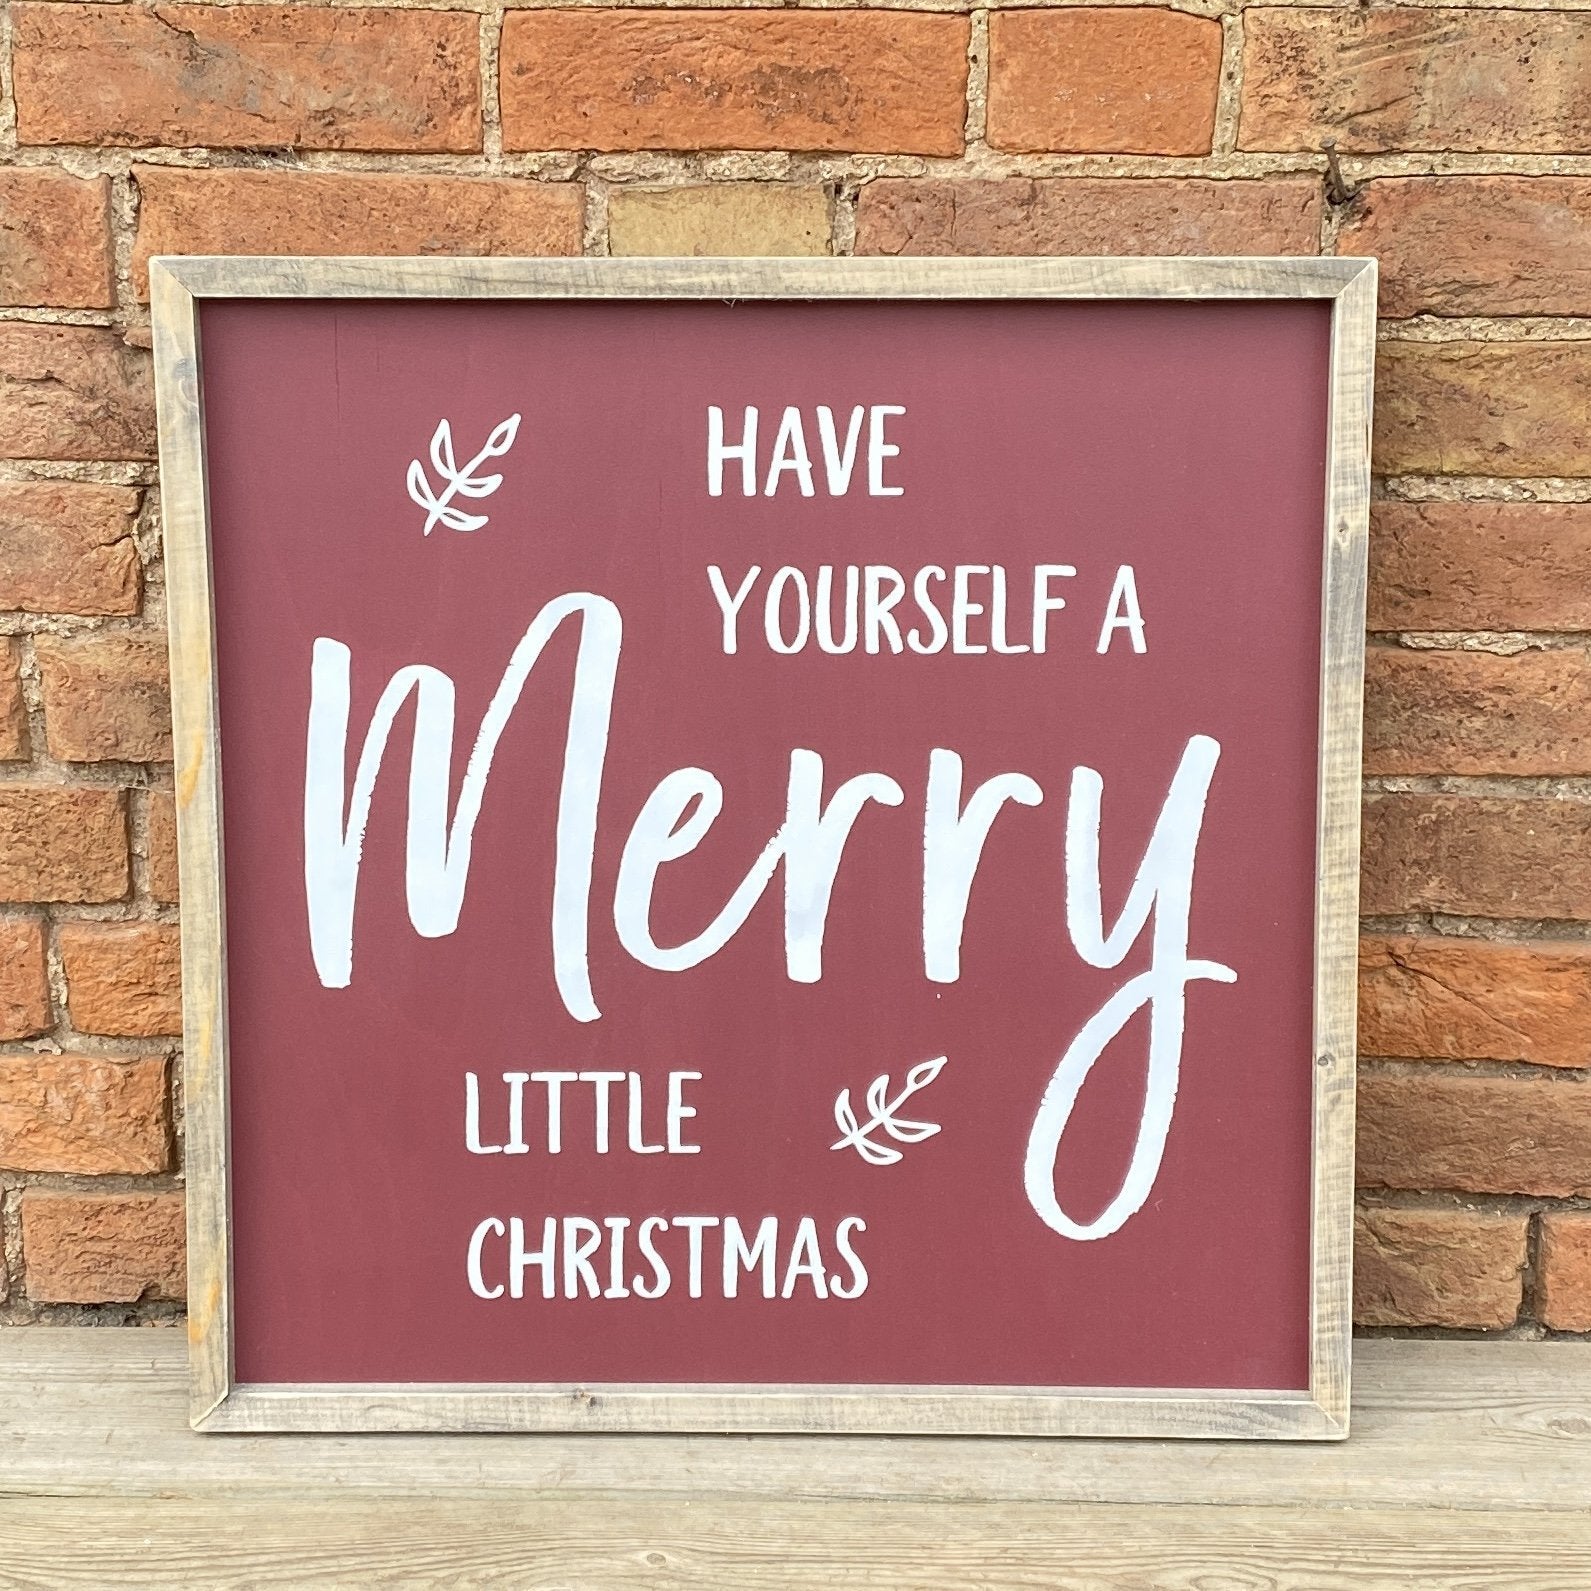 Merry Little Christmas | Framed Wood Sign - The Imperfect Wood Company - Framed Wood Sign